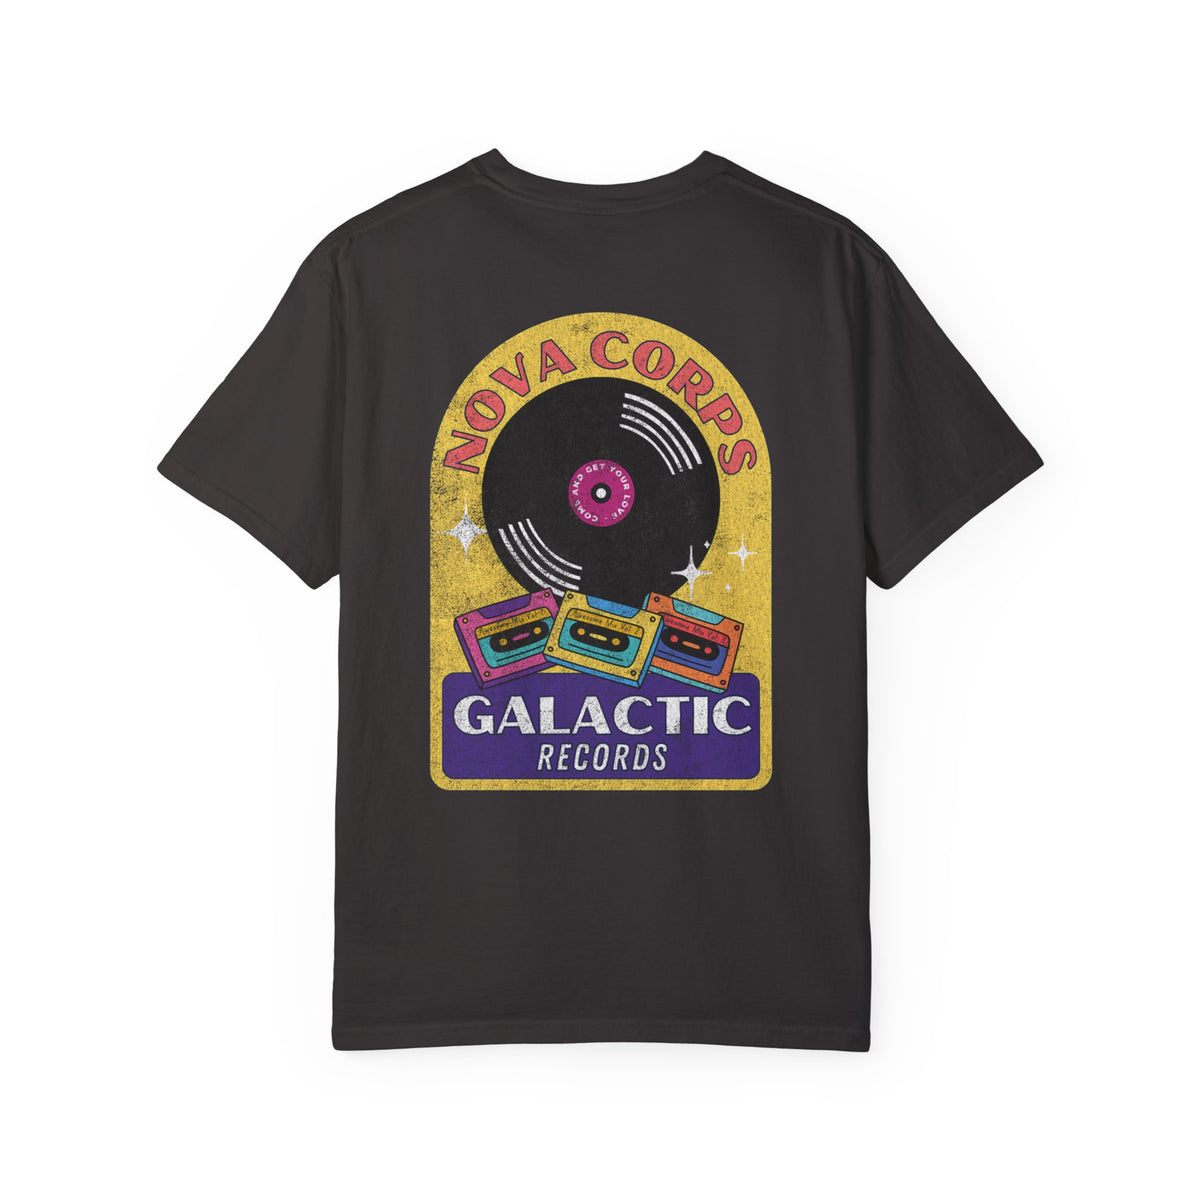 Galactic Records Comfort Colors Unisex Garment-Dyed T-shirt